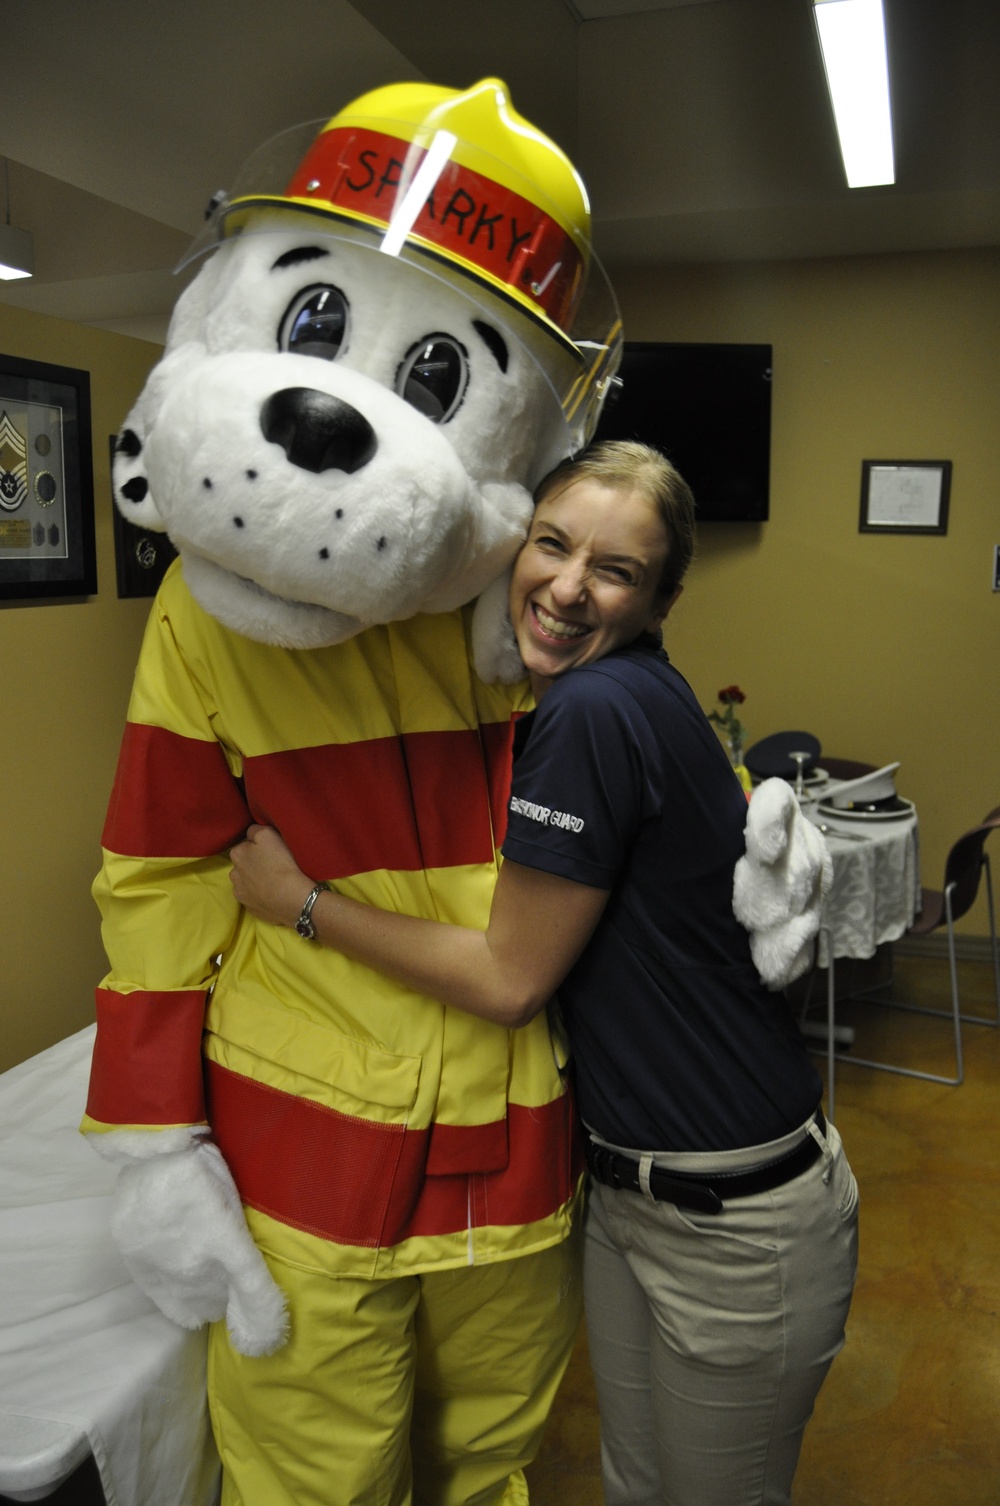 Sparky the Fire Dog visits the 152nd Airlift Wing to spread fire safety awareness